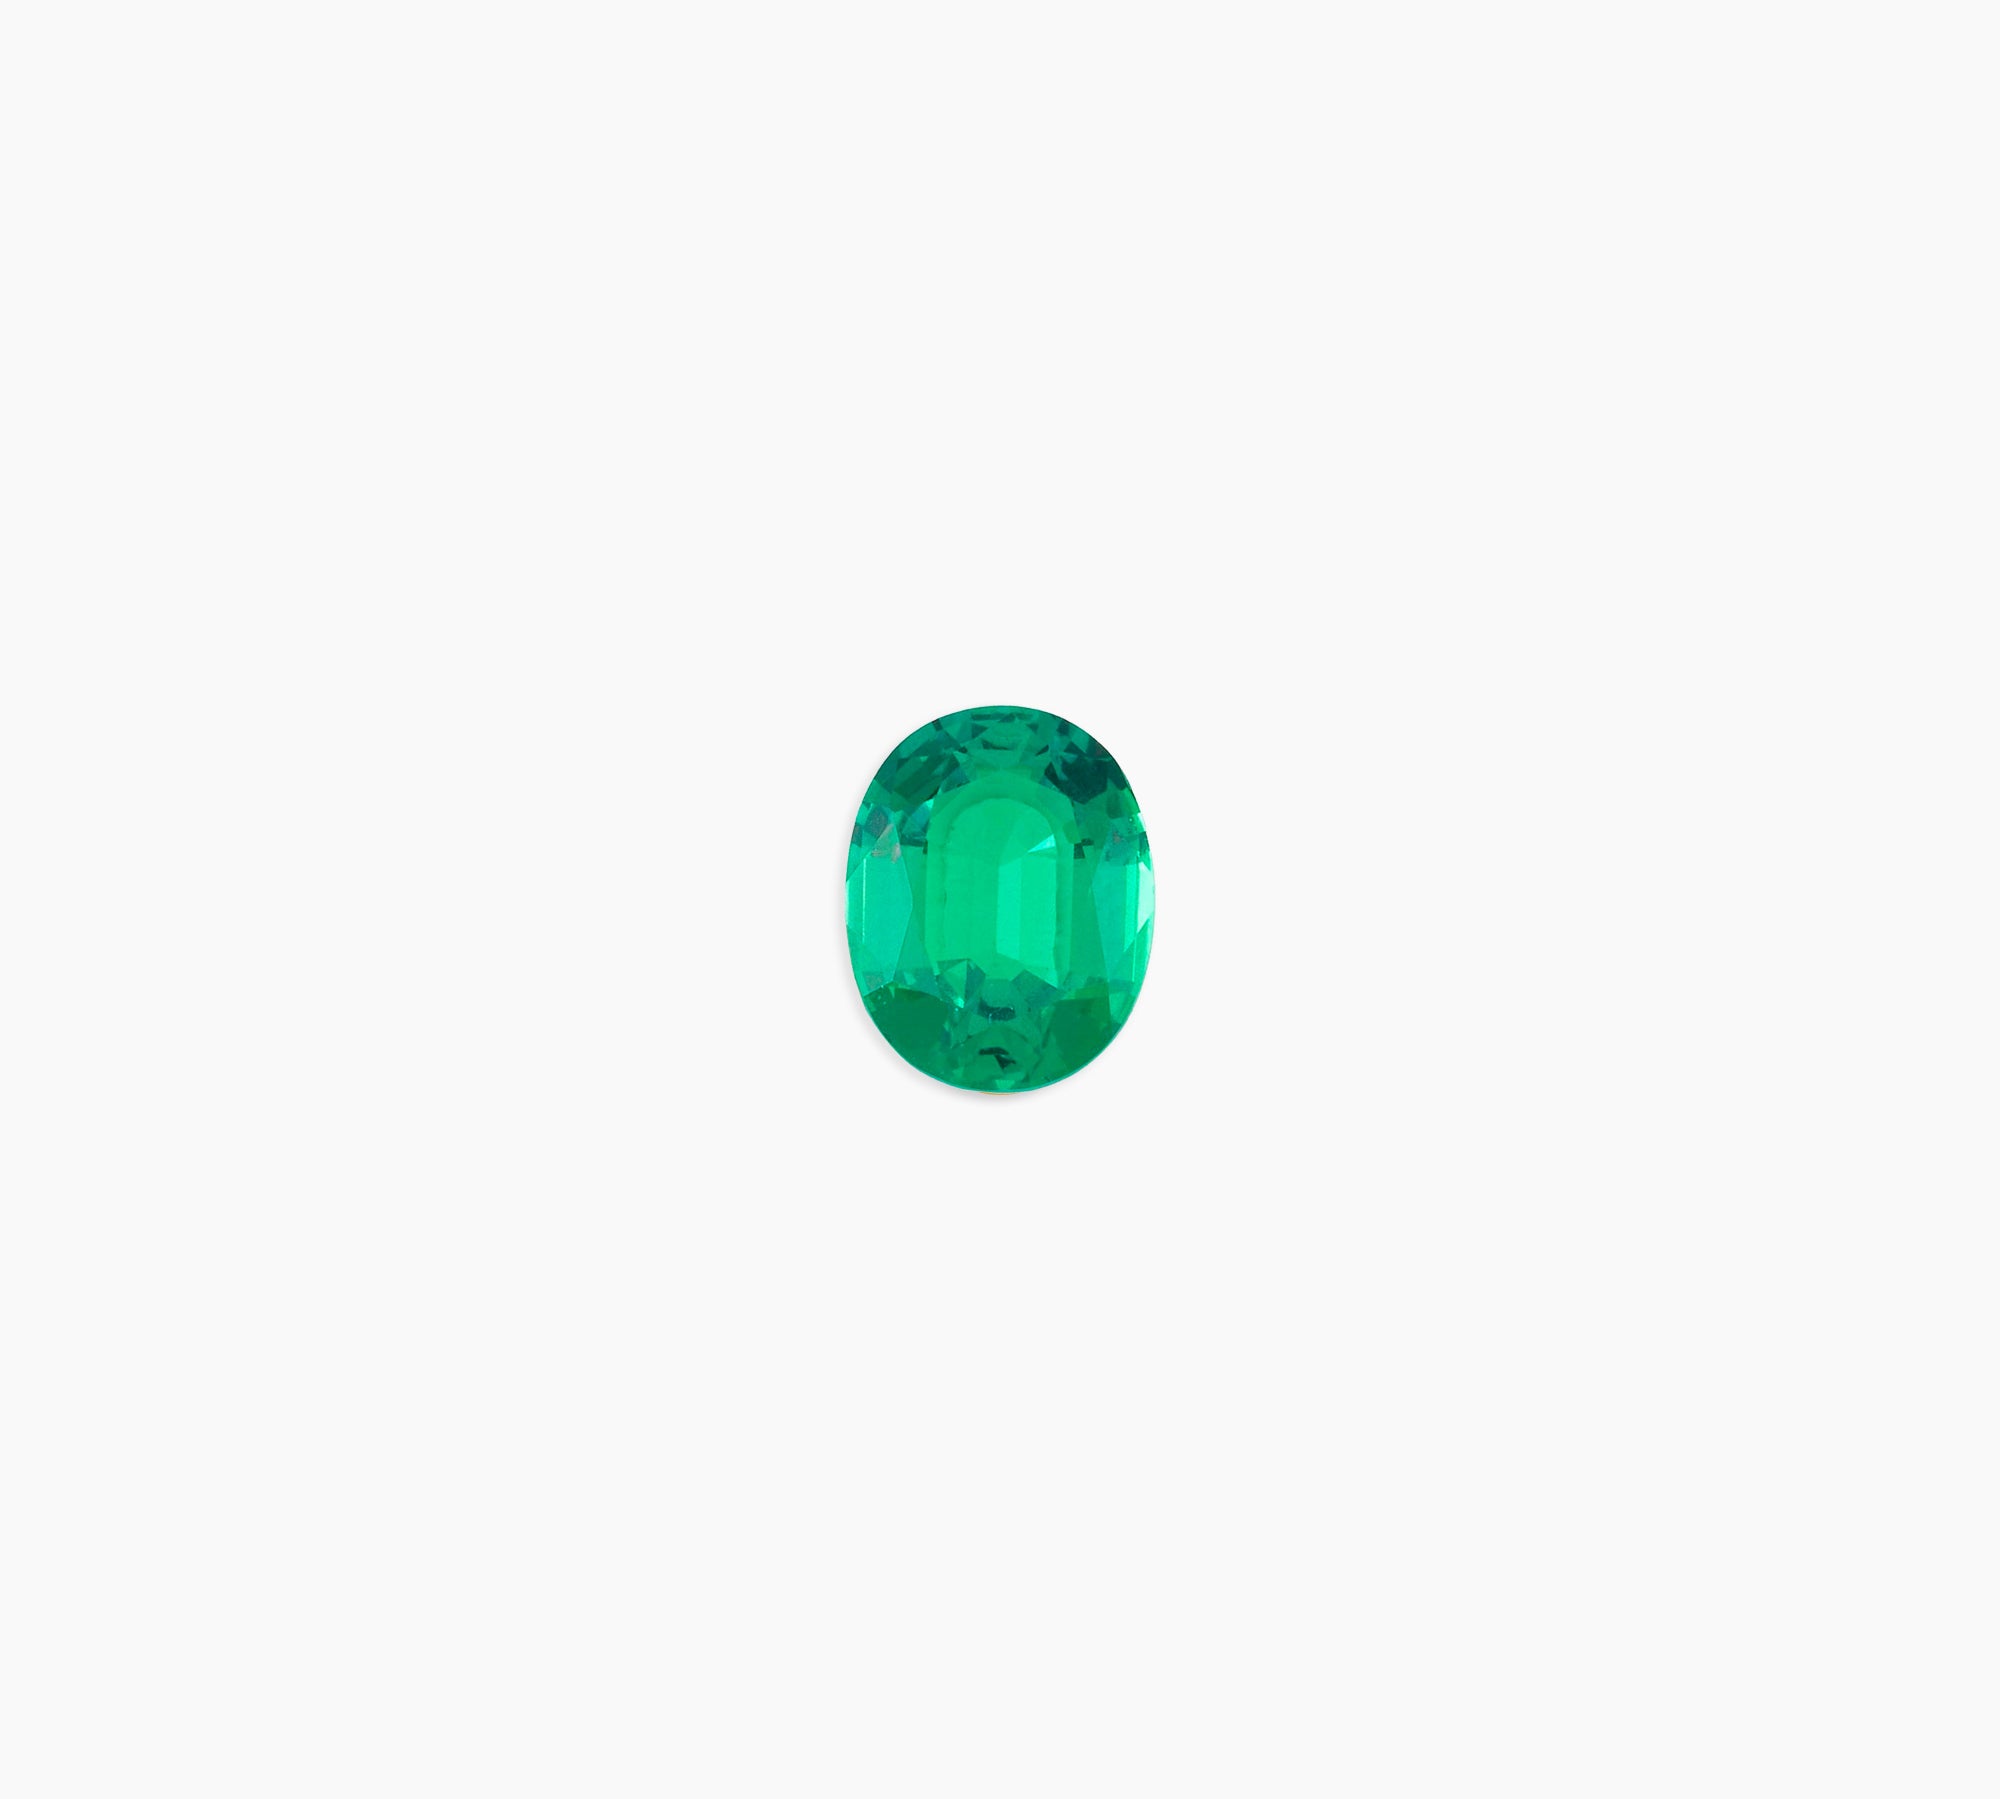 Emerald Gemstone Charm - High Quality, Affordable, Individual Birthstone Charms for a Custom Locket - May Birthday Gift - Brevity Jewelry